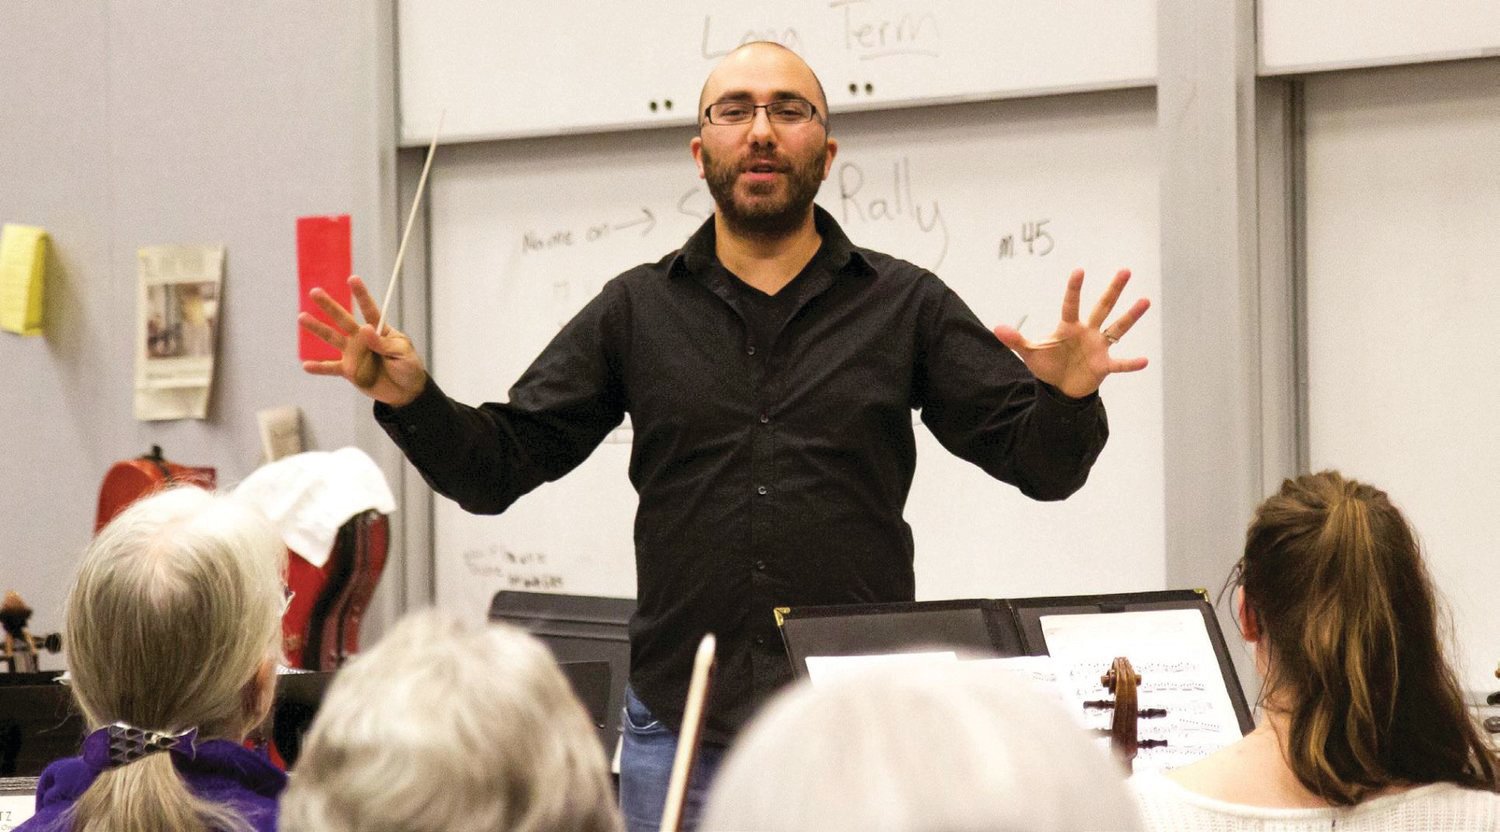 Tigran Arakelyan, artistic director and conductor of the Port Townsend Symphony, will host a new show on KPTZ Radio Port Townsend called “Exploring Music” from 3 to 4 p.m. Sundays.